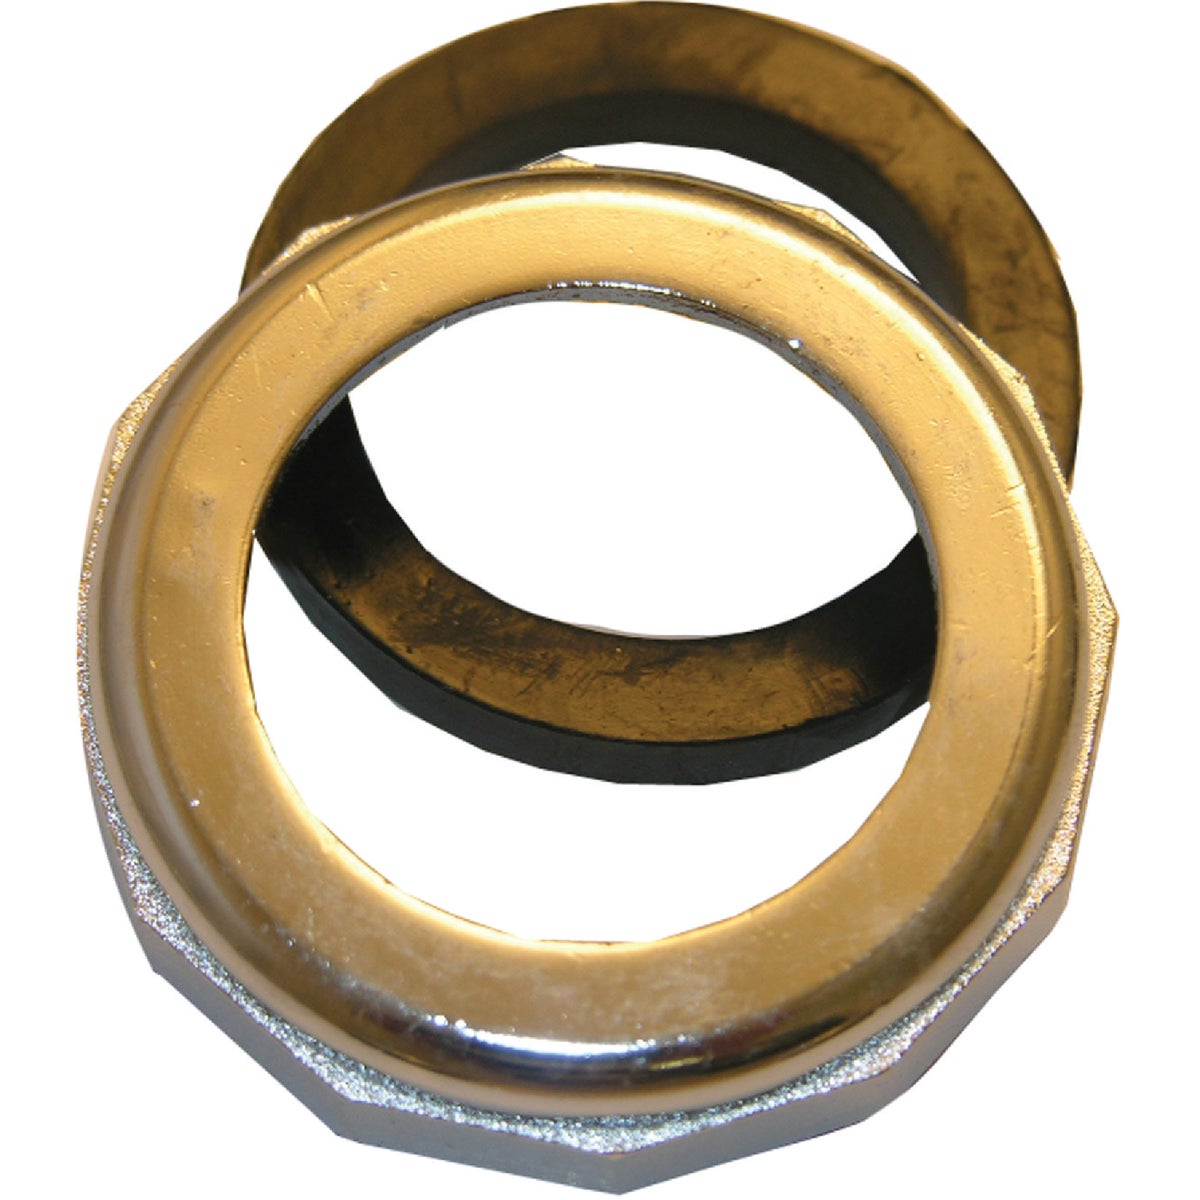 Lasco 1-1/2 In. x 1-1/4 In. Chrome Plated Slip Joint Nut and Washer